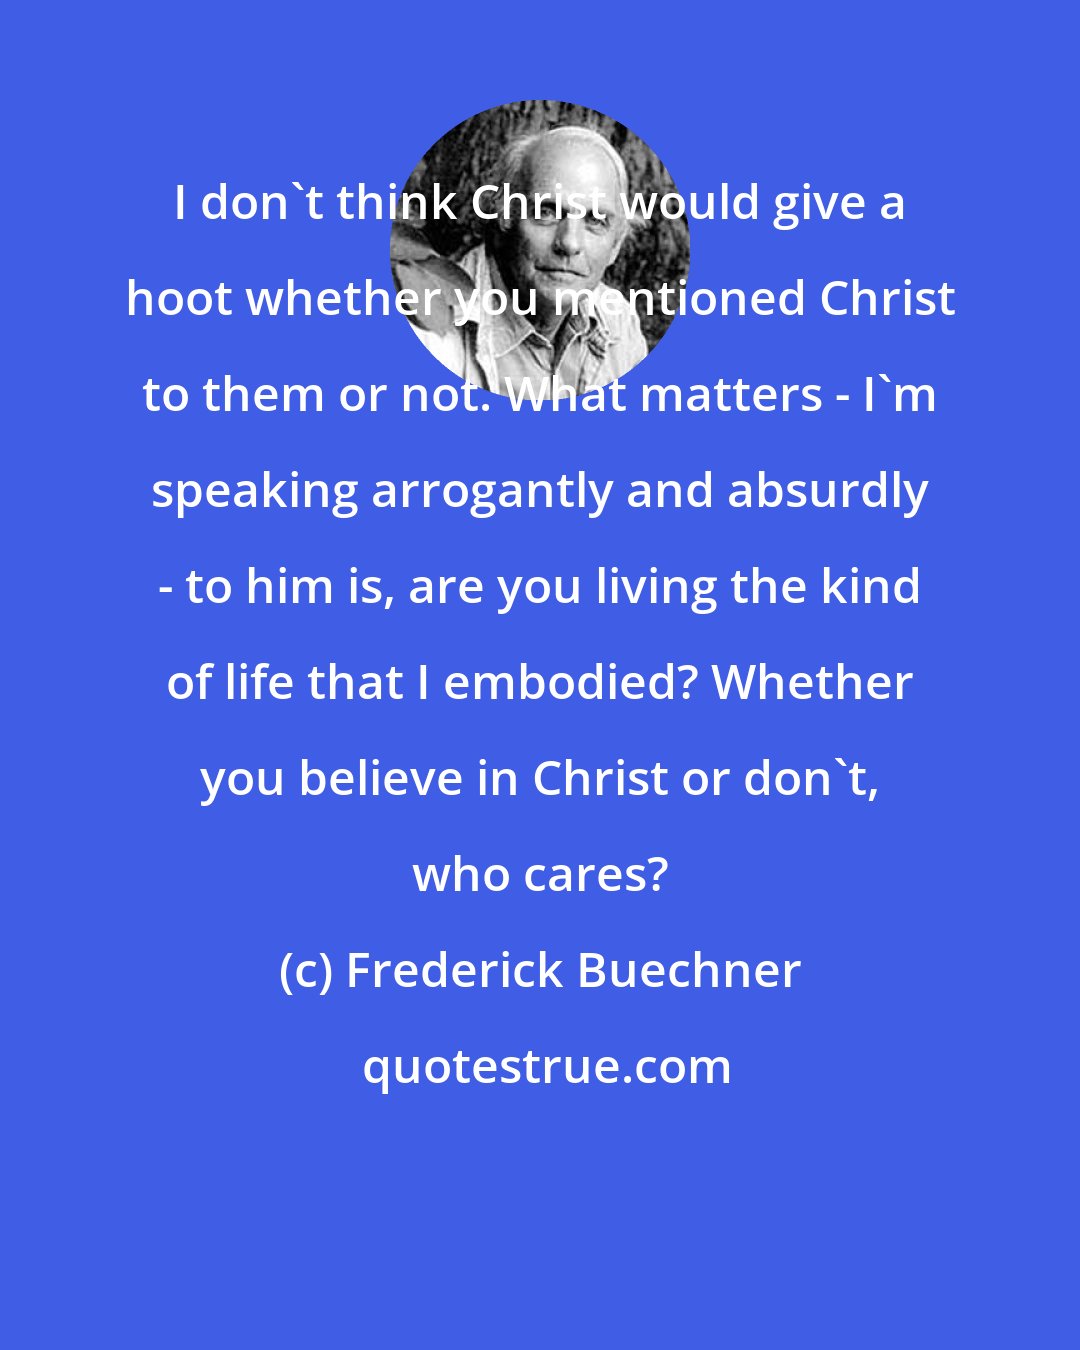 Frederick Buechner: I don't think Christ would give a hoot whether you mentioned Christ to them or not. What matters - I'm speaking arrogantly and absurdly - to him is, are you living the kind of life that I embodied? Whether you believe in Christ or don't, who cares?